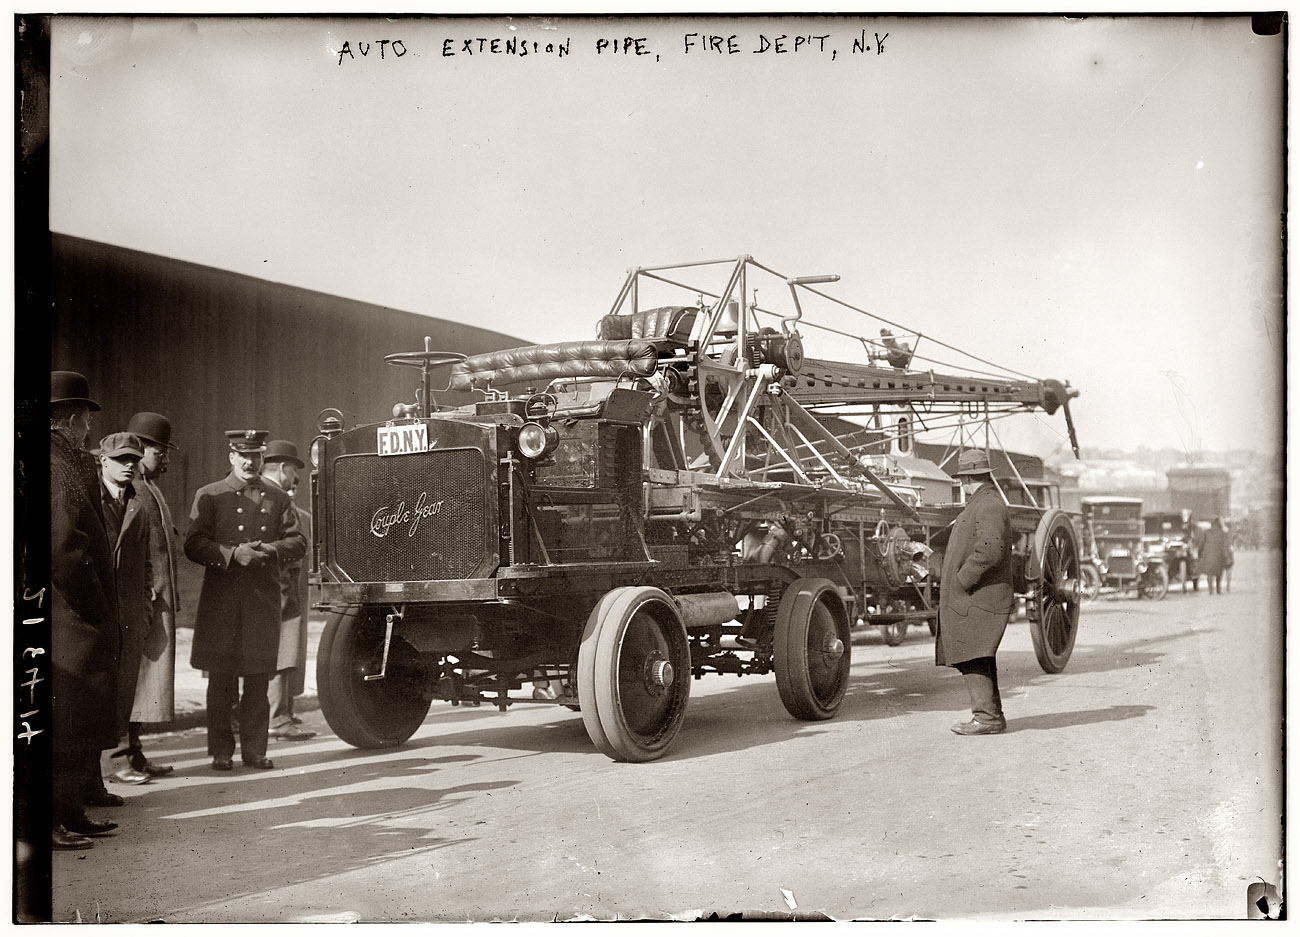 New York Fire Department "auto extension pipe" hose truck (?) circa 1913. "Couple Gear" on radiator. View full size. George Grantham Bain Collection.